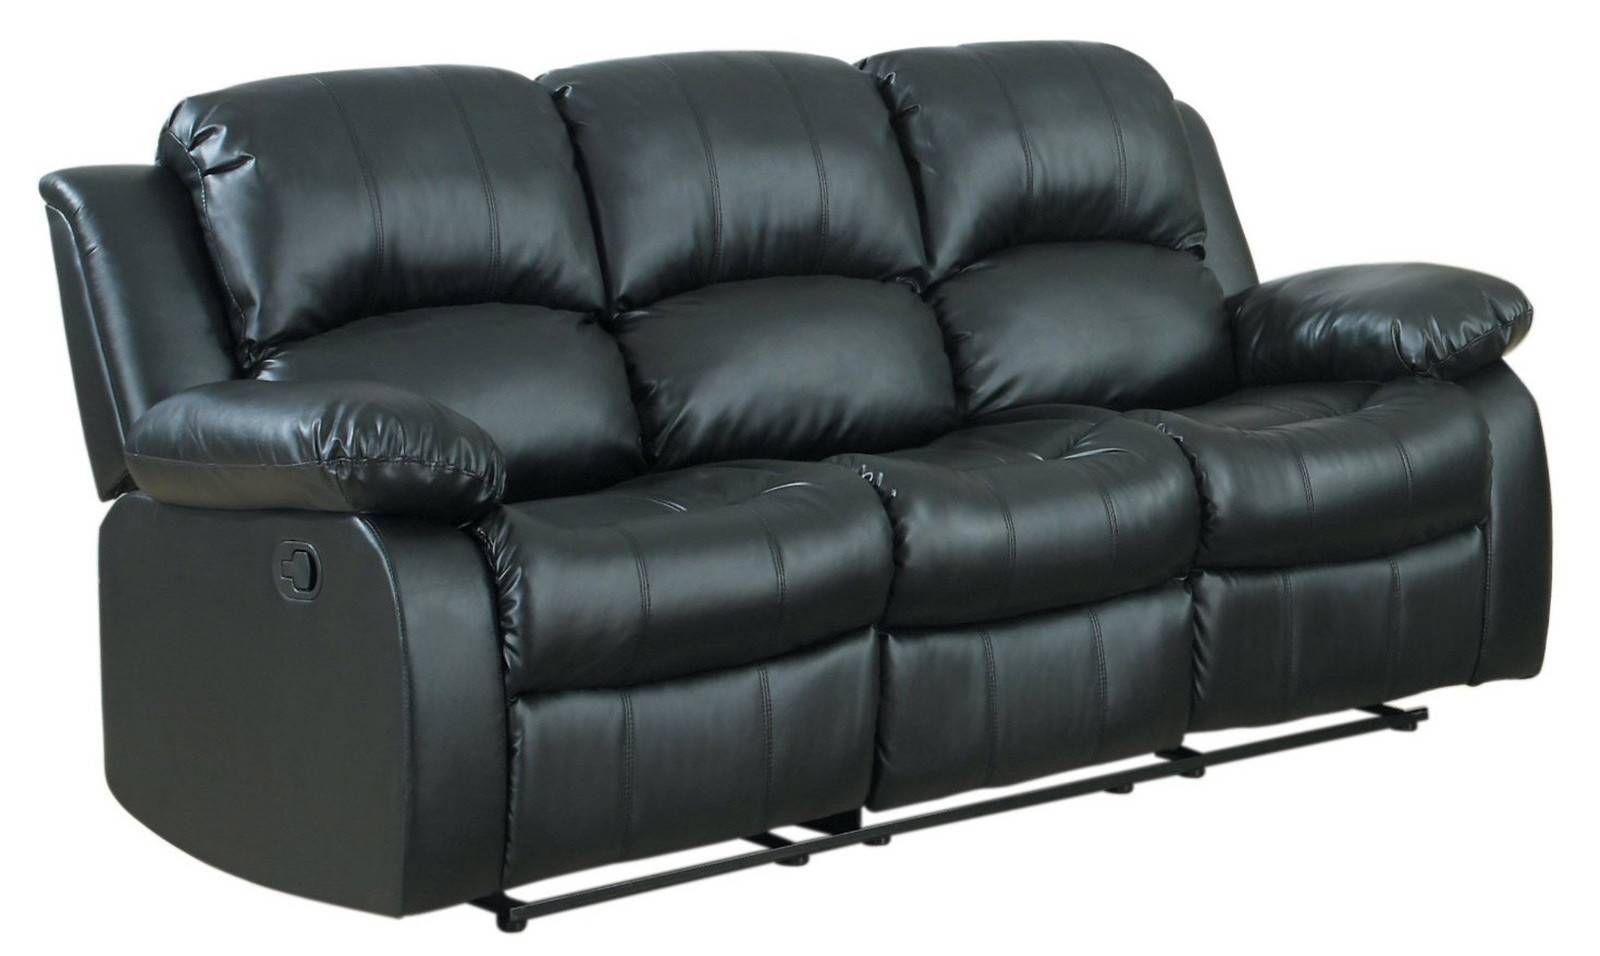 Classic 3 Seat Bonded Leather Double Recliner Sofa – Walmart Inside 3 Seater Leather Sofas (View 3 of 30)